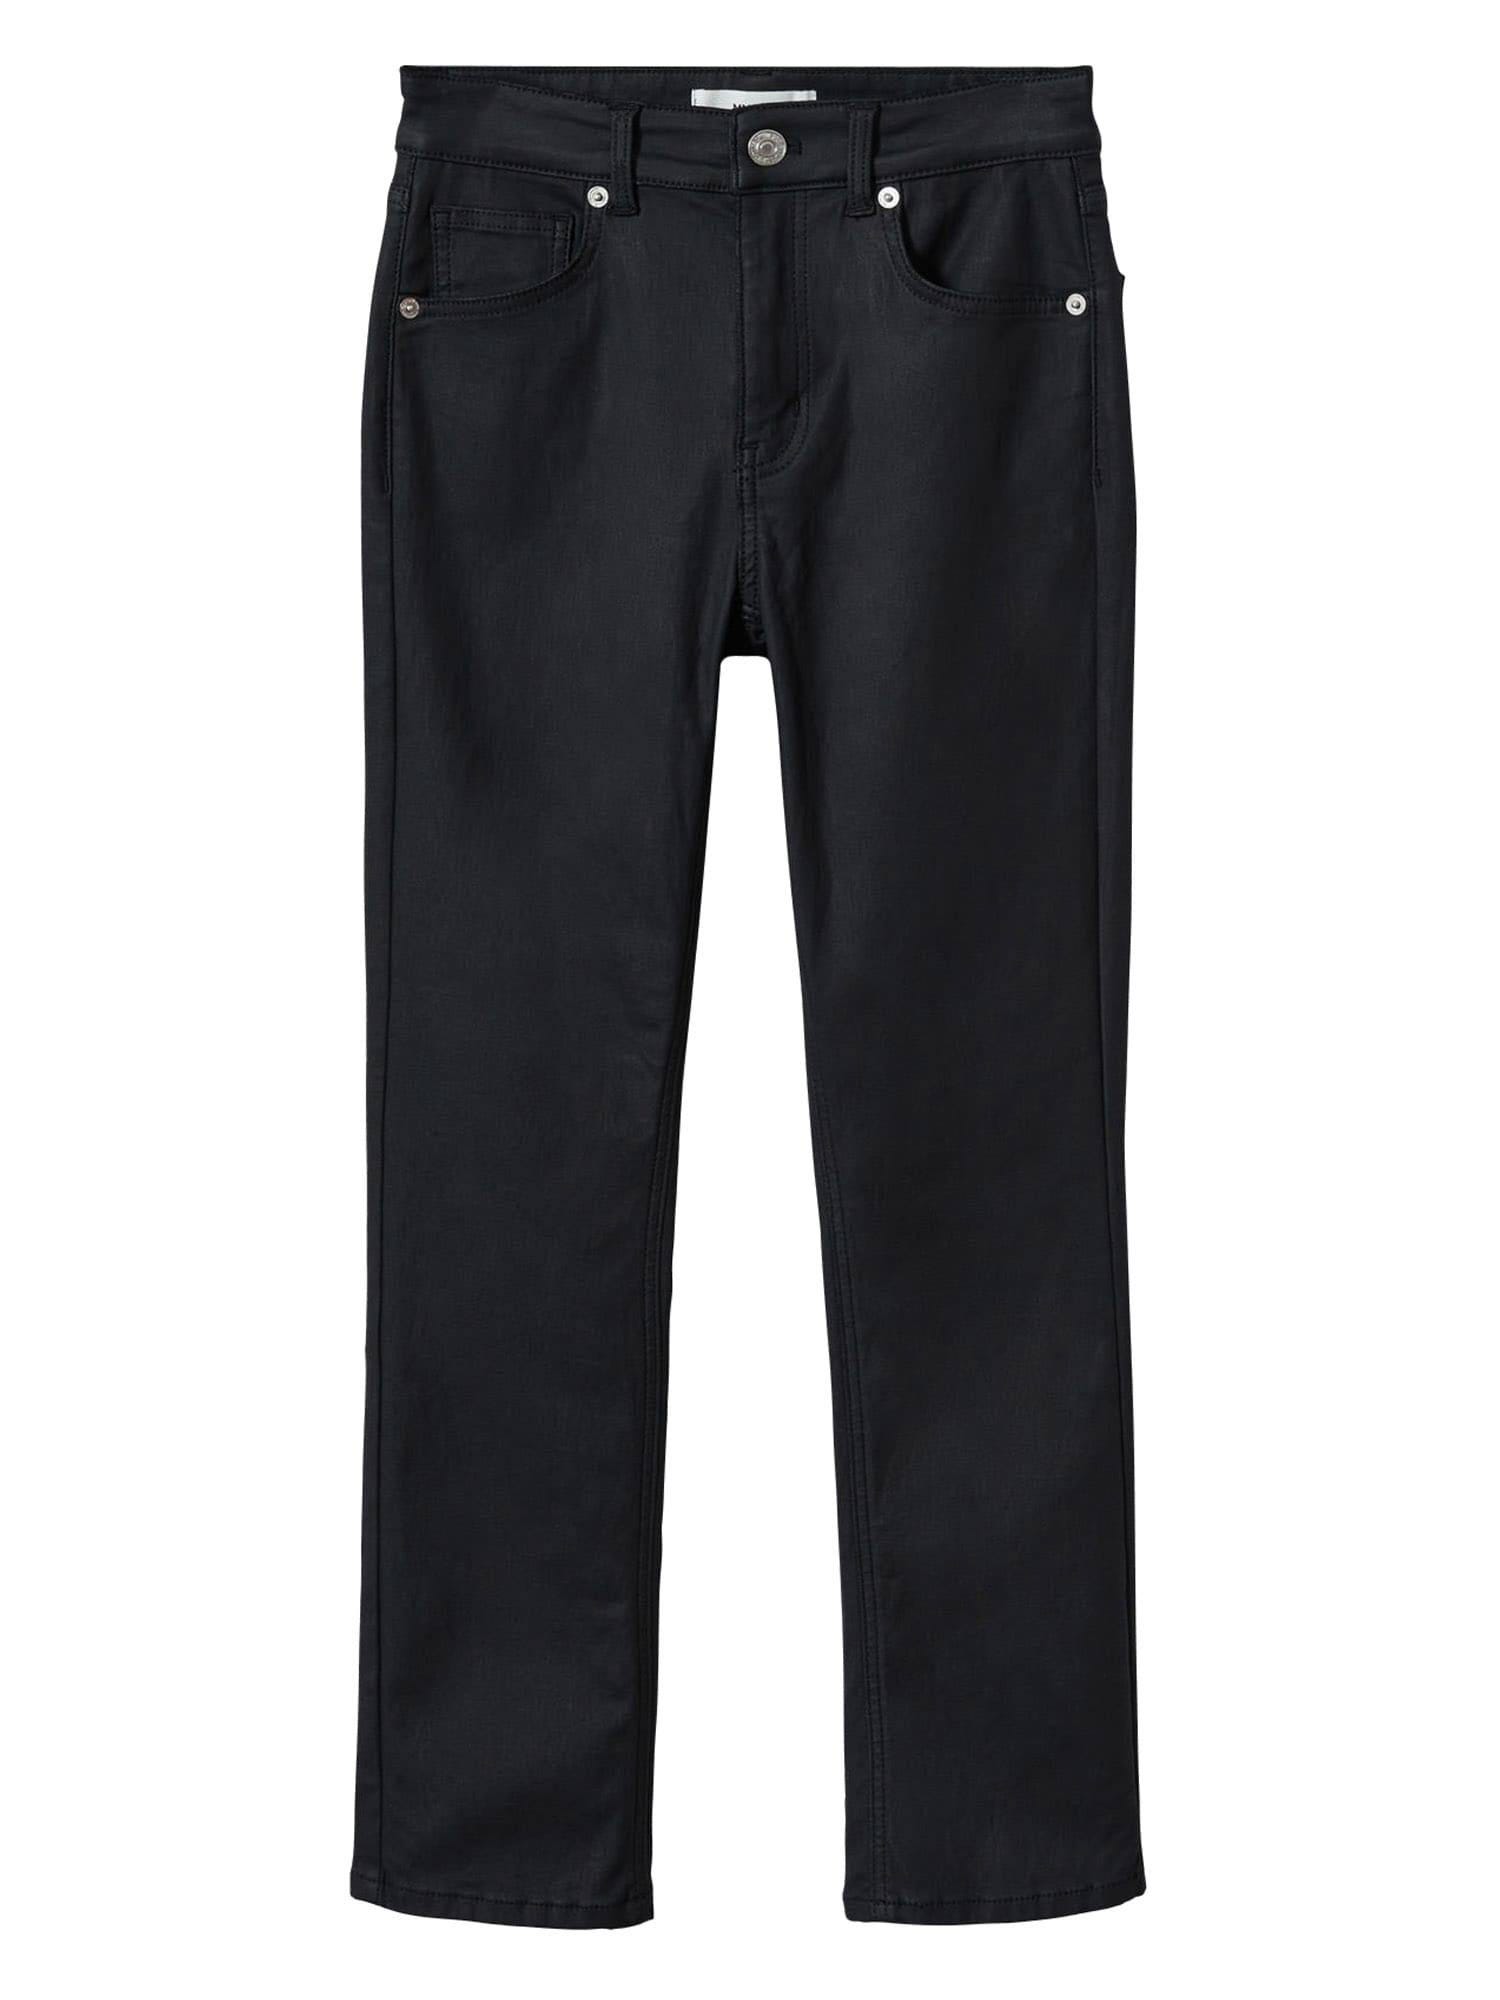 Black Mid Rise Jeans for Women by Mango | Image